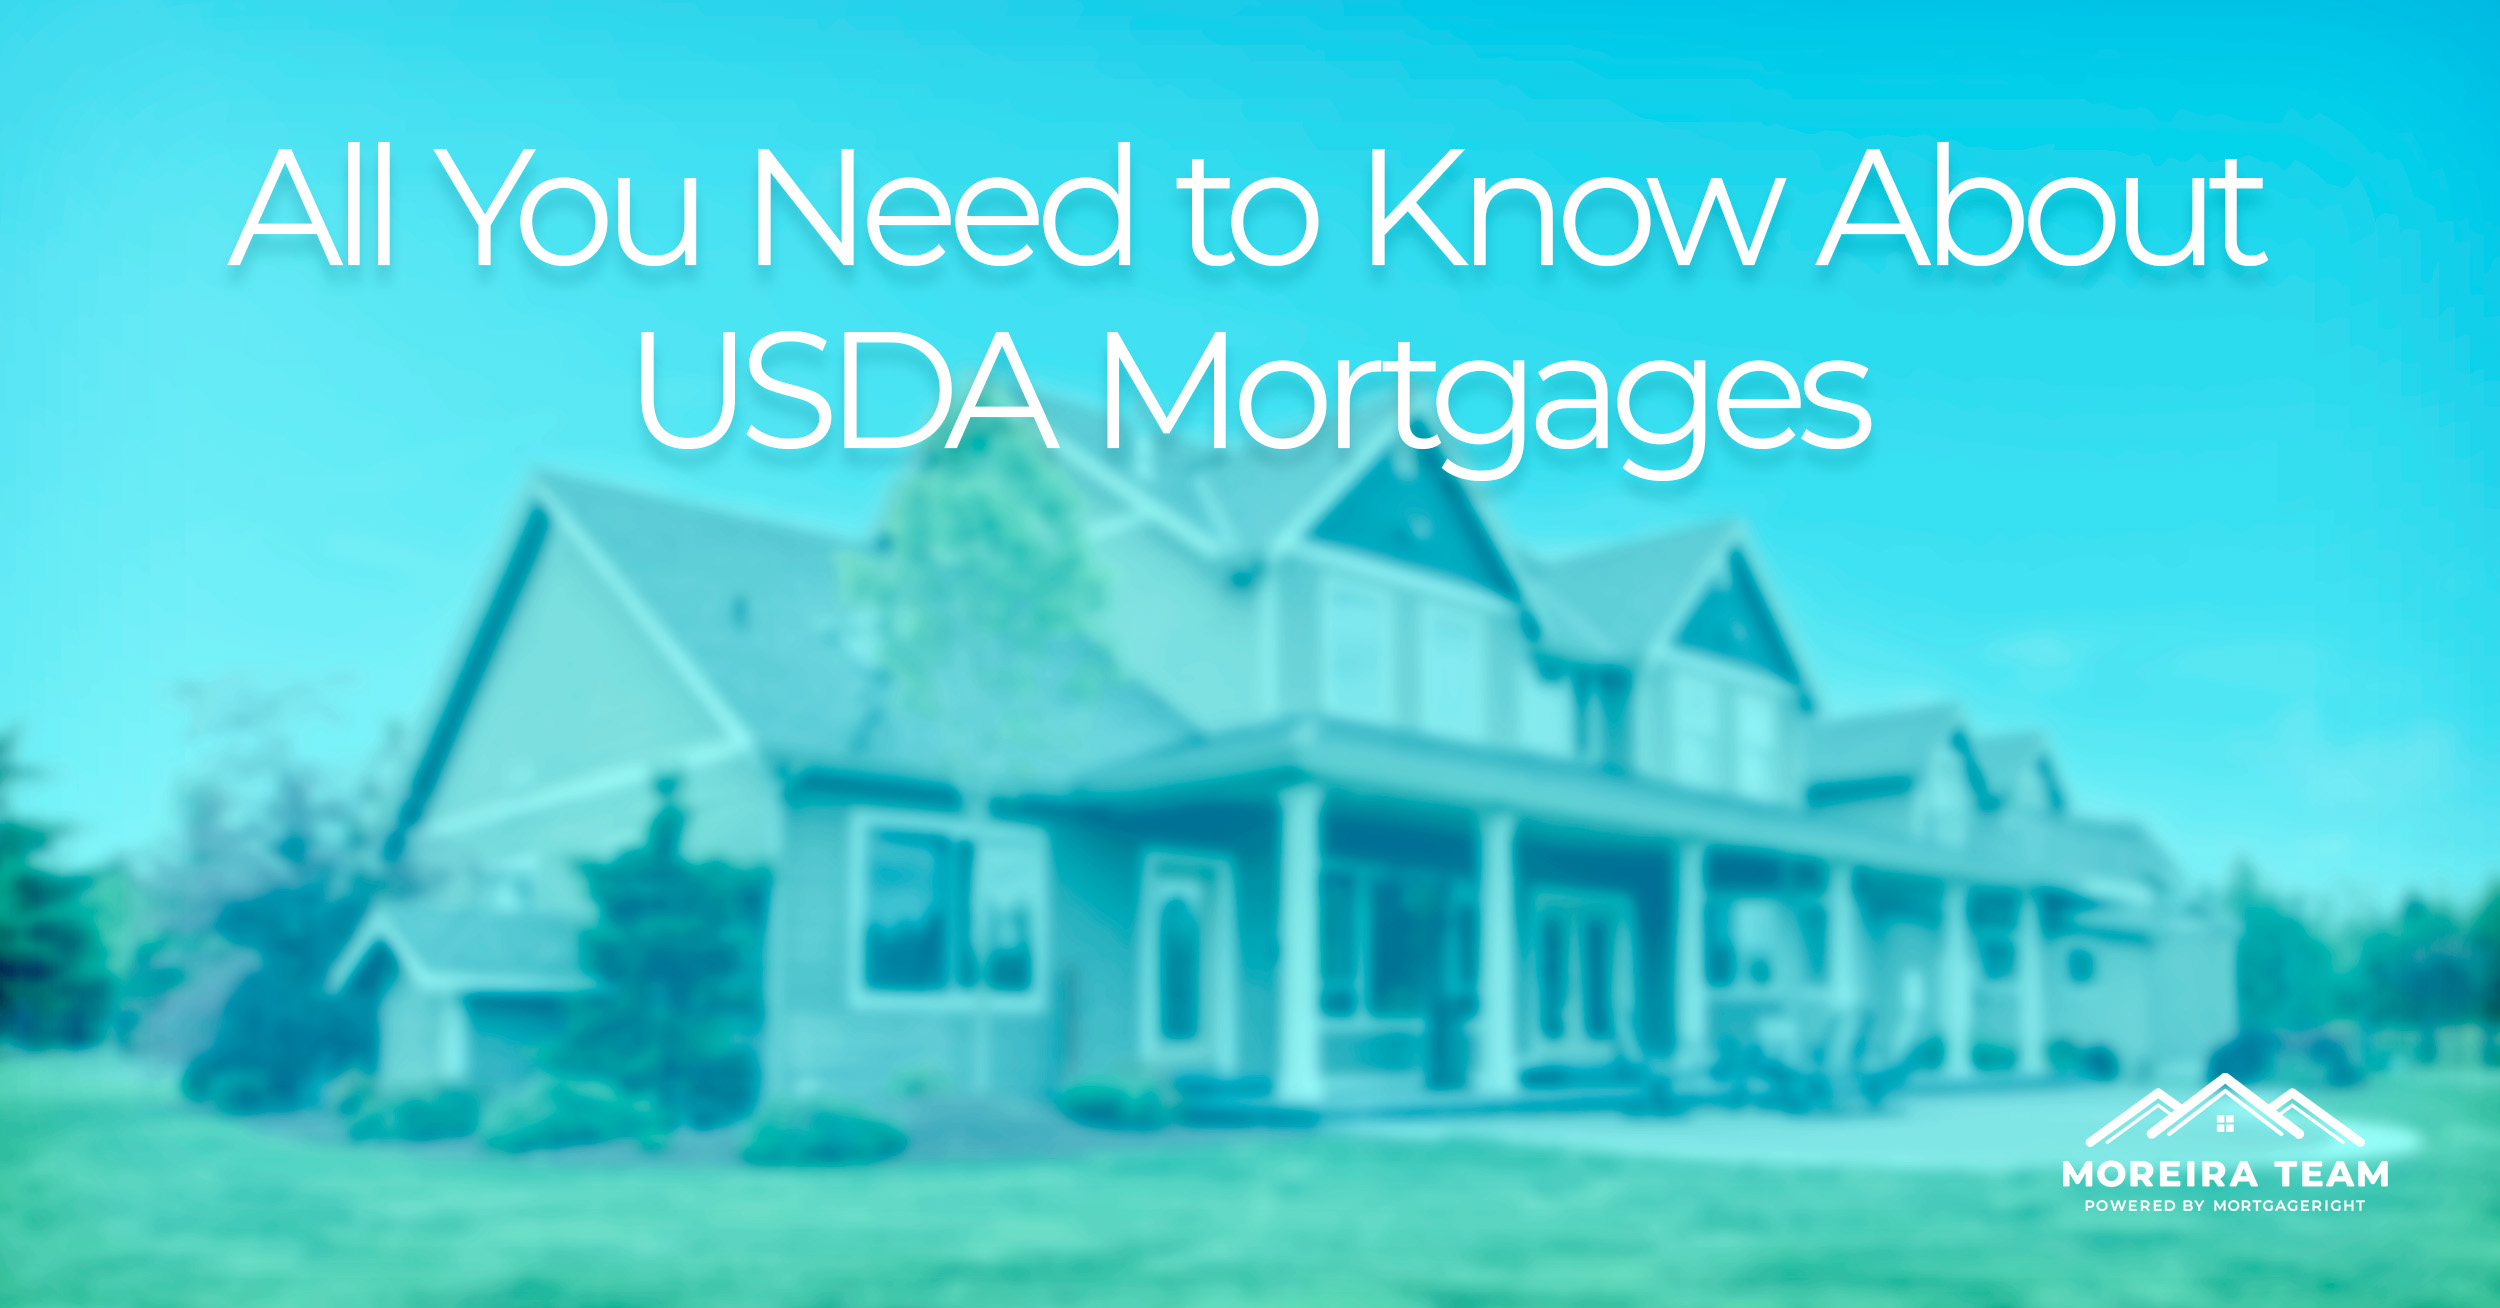 USDA Mortgages – All You Need to Know